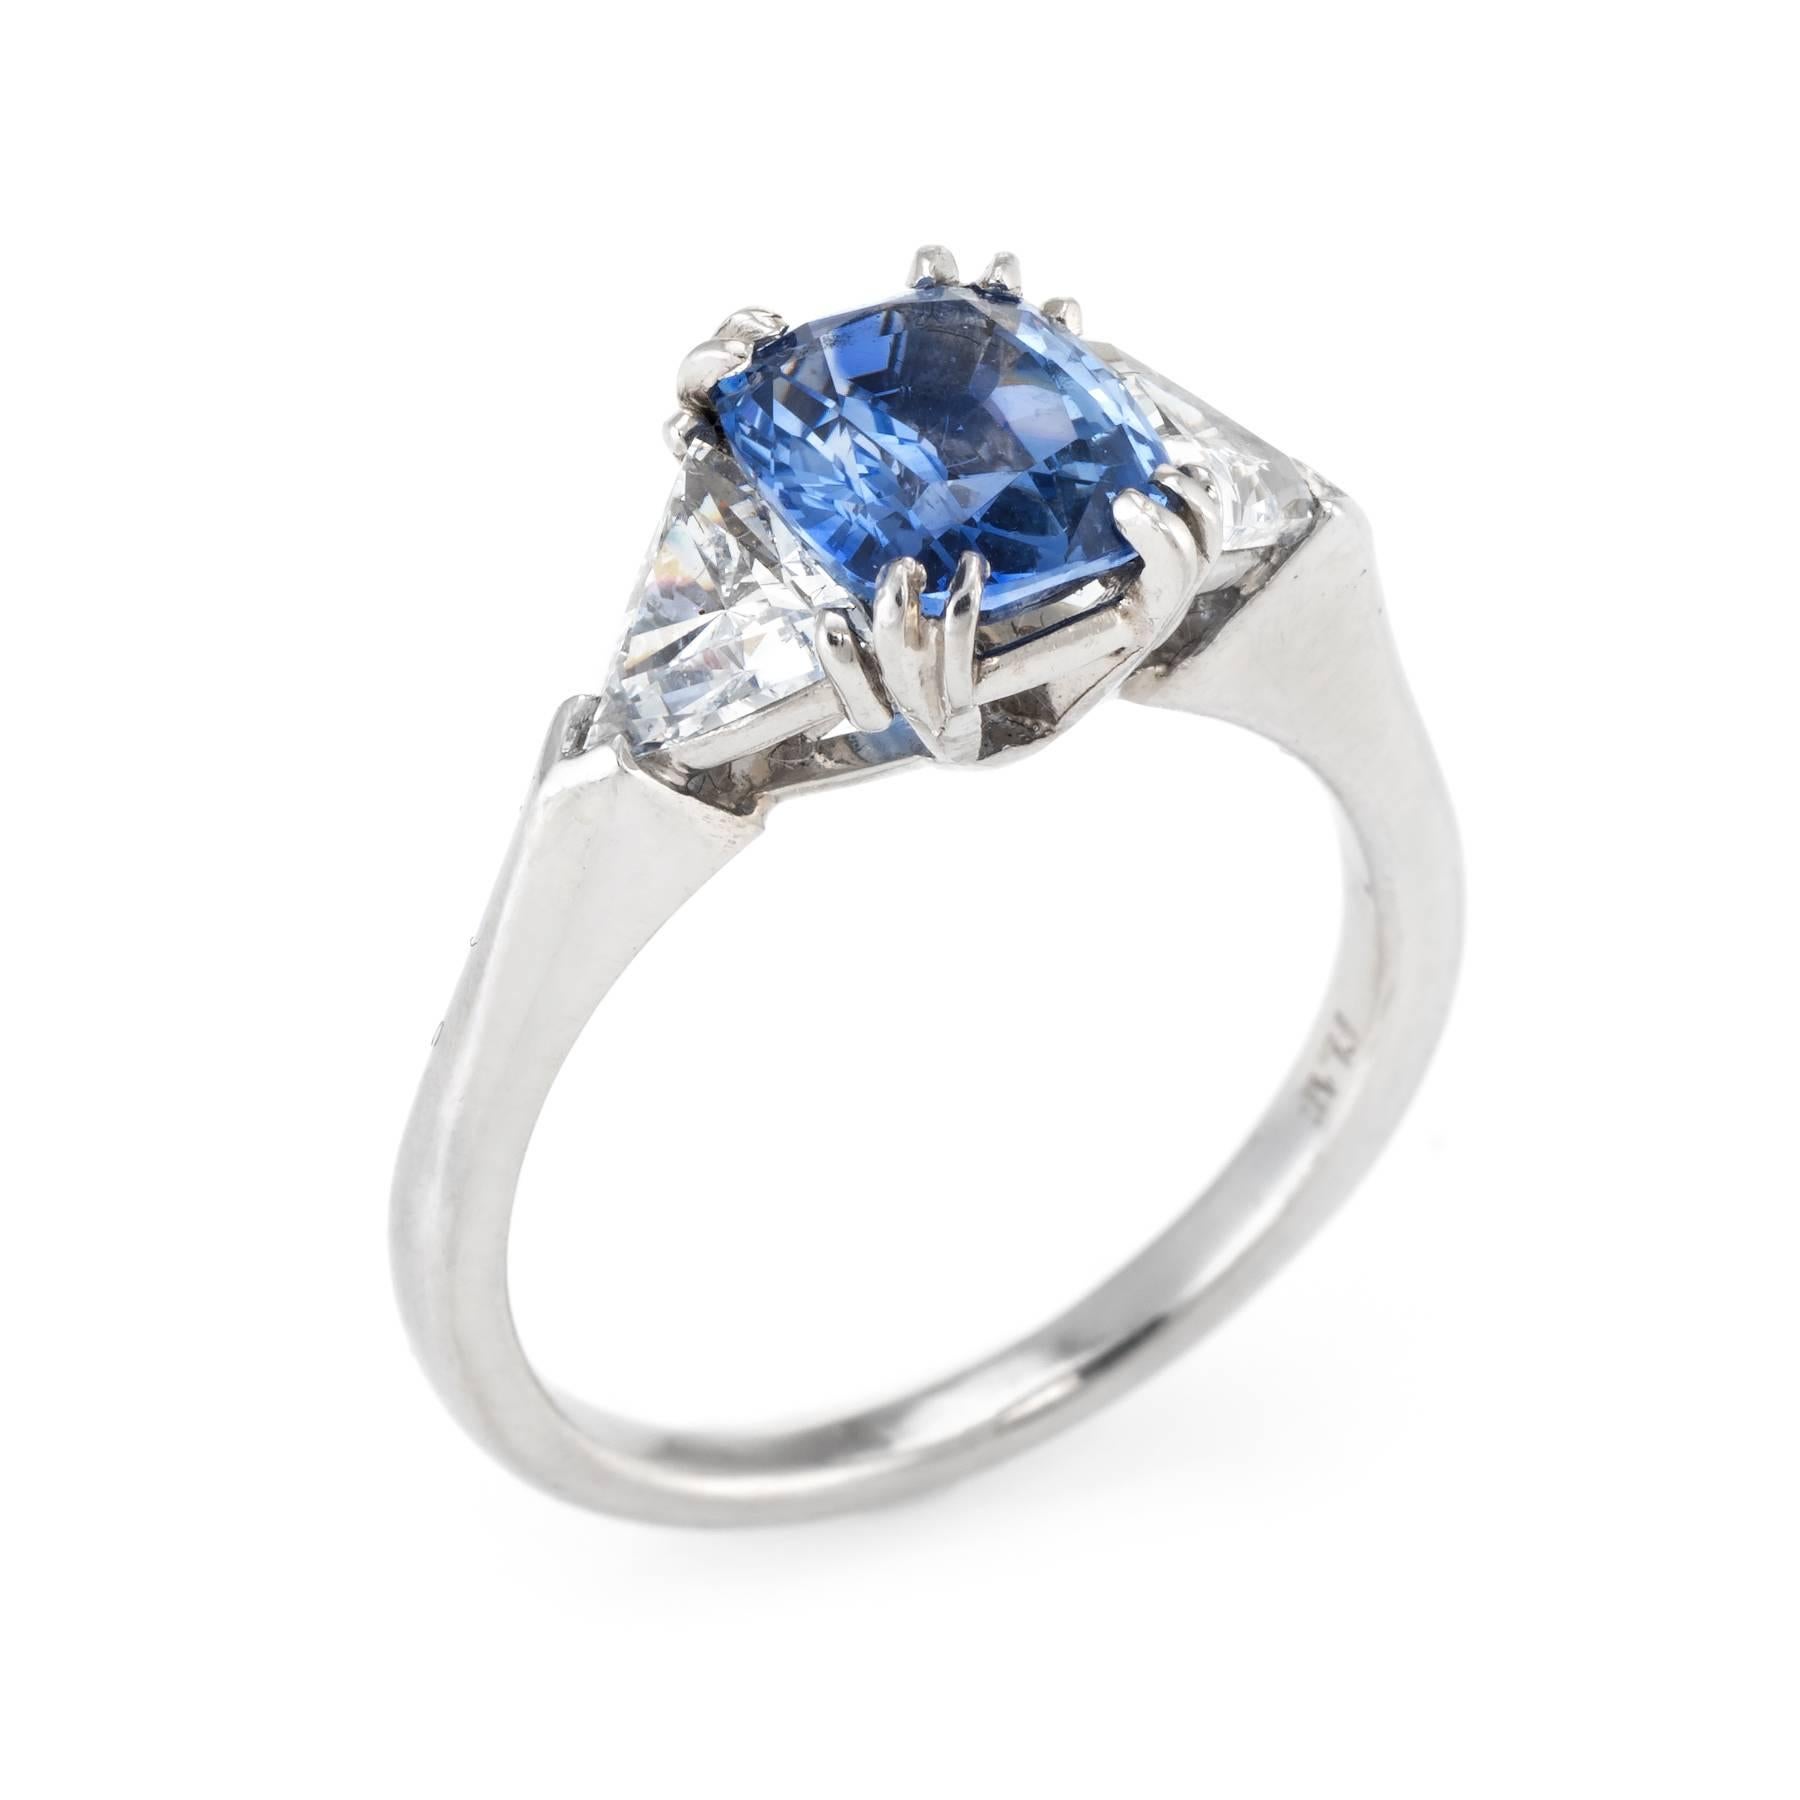 Elegant estate engagement or right hand ring, crafted in 900 platinum. 

Cushion cut sapphire measures 8mm x 6.5mm (estimated at 1.75 carats), accented with two estimated 0.37 carat trillion cut diamonds (total diamond weight is estimated at 0.75